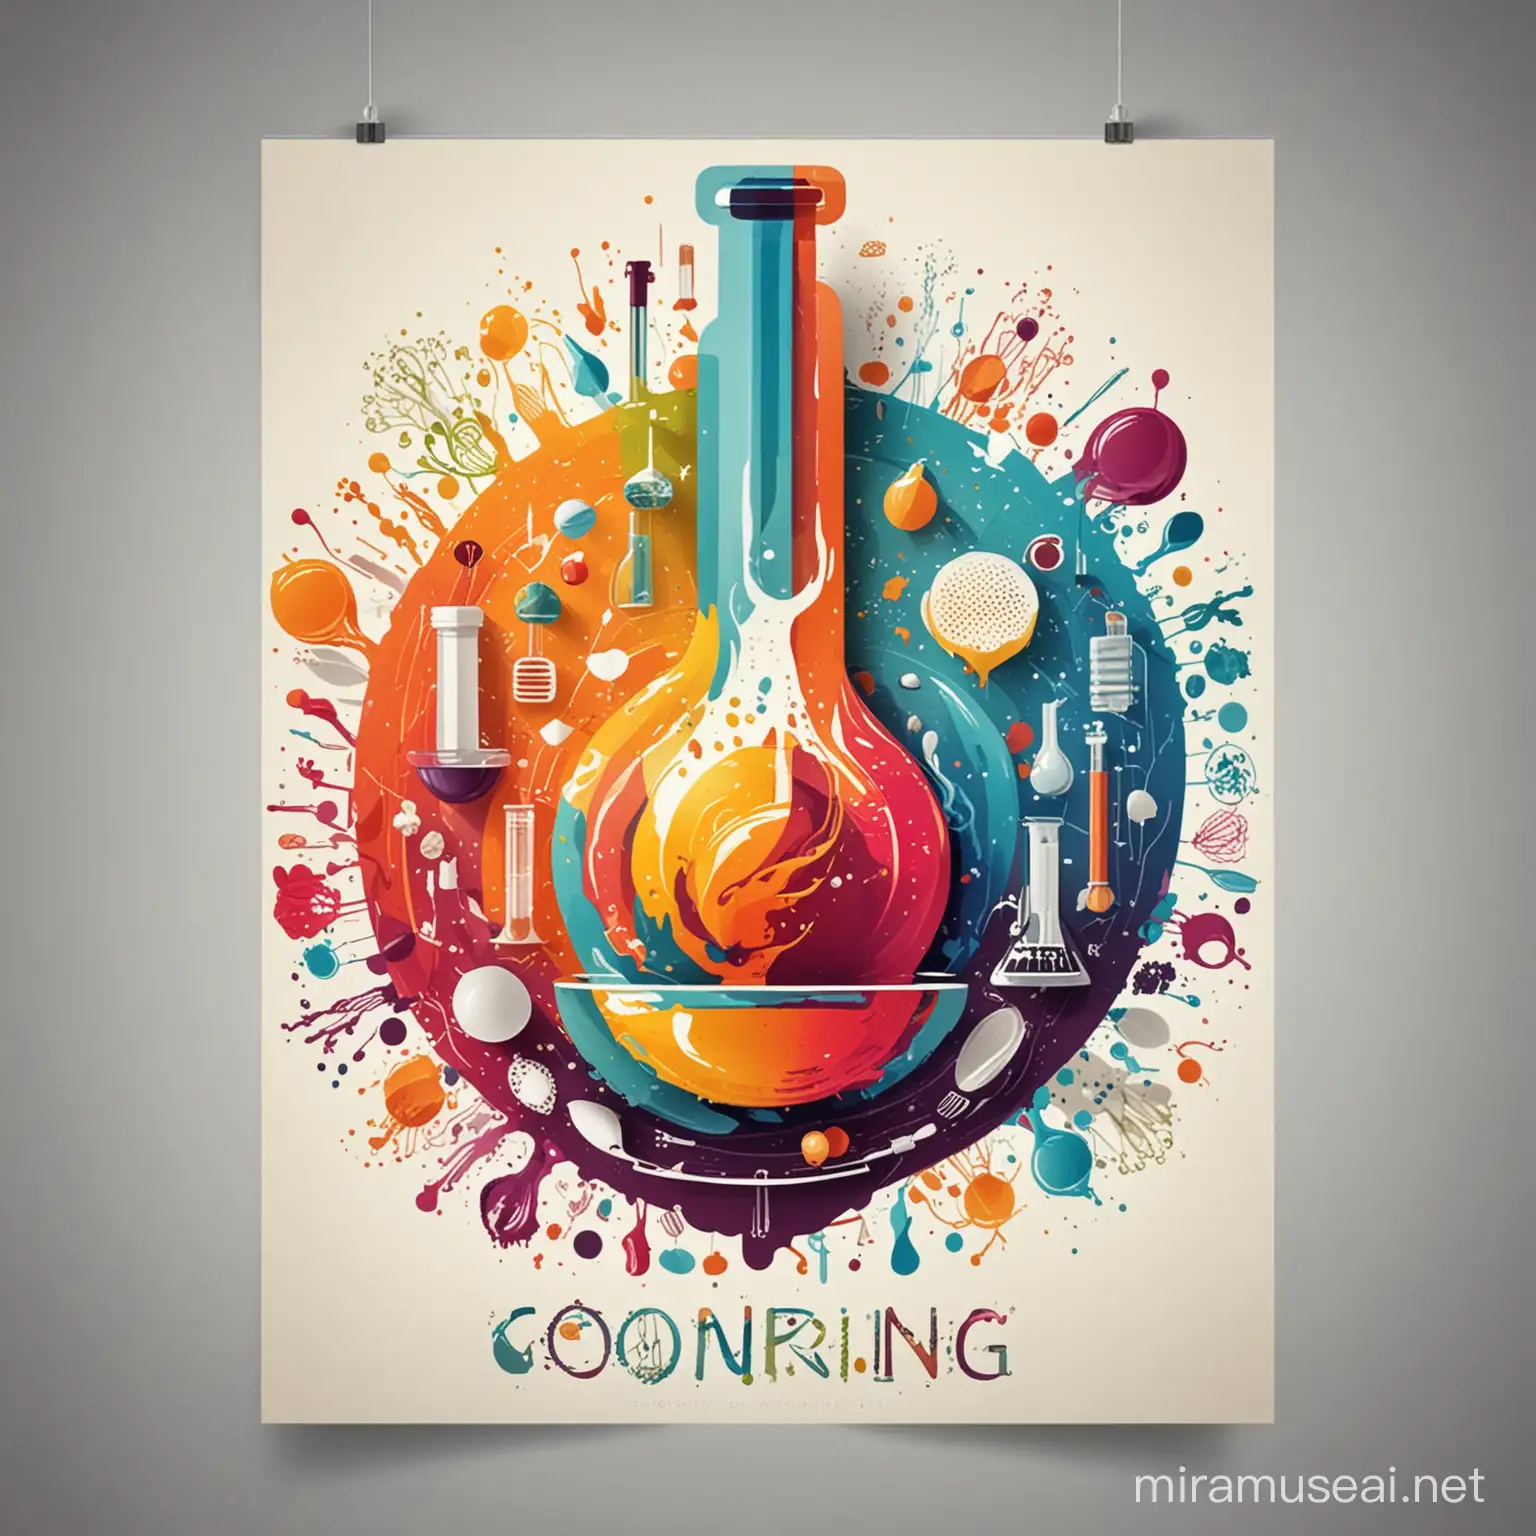 Innovative Cooking Lab Abstract Poster Design with Colorful Themes of Innovation